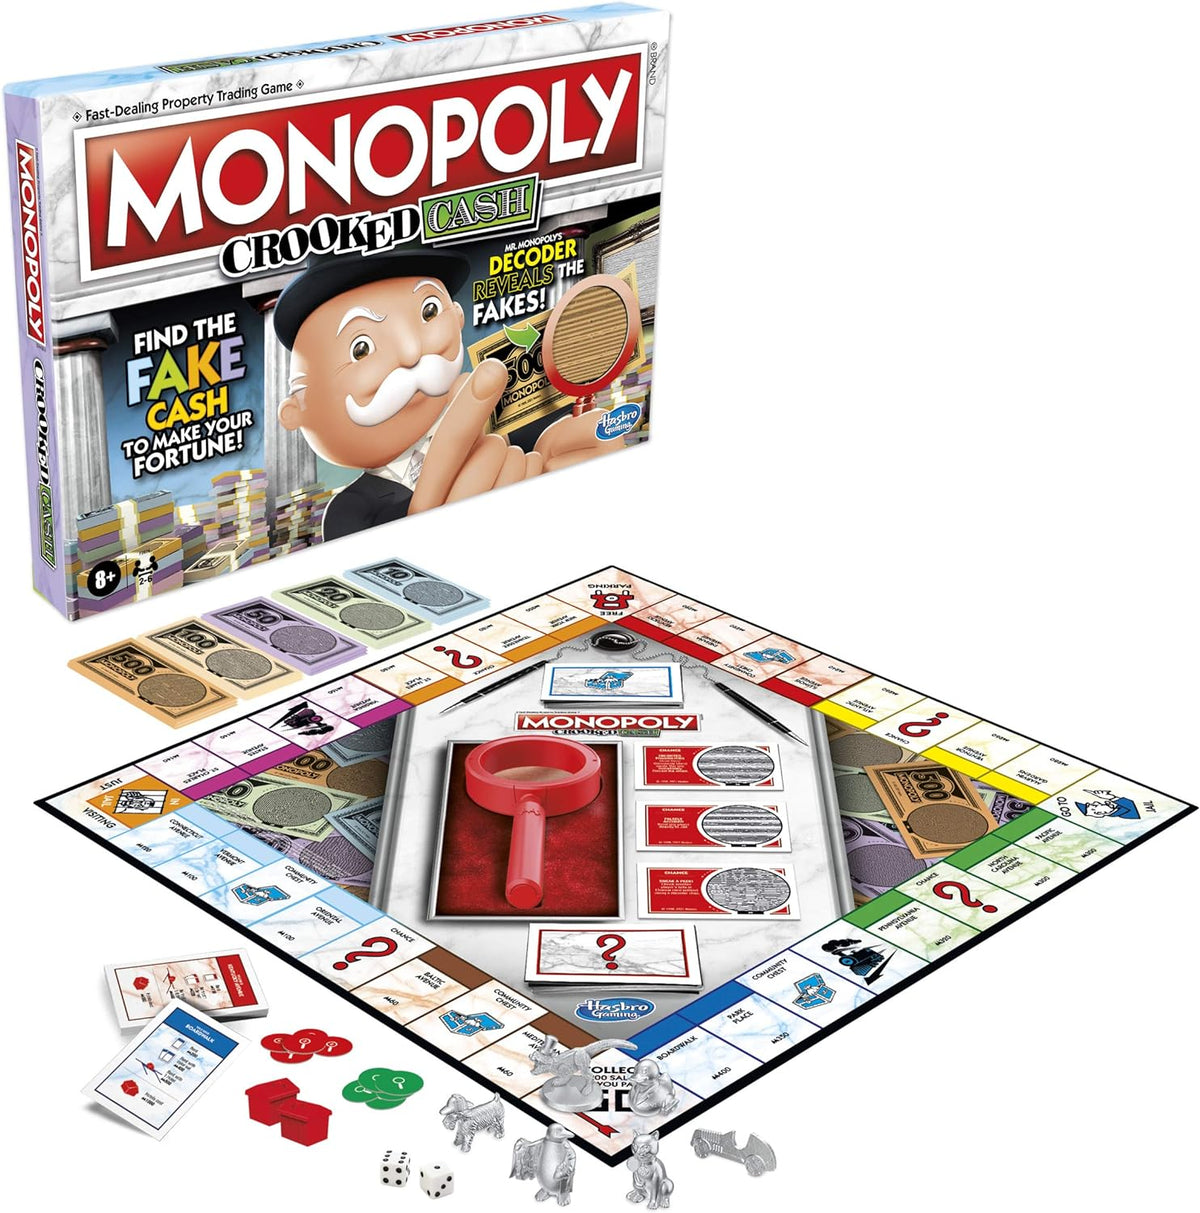 Monopoly Crooked Cash Board Game for Families and Kids Ages 8 and Up, Includes Mr Decoder to Find Fakes, Game for 2-6 Players